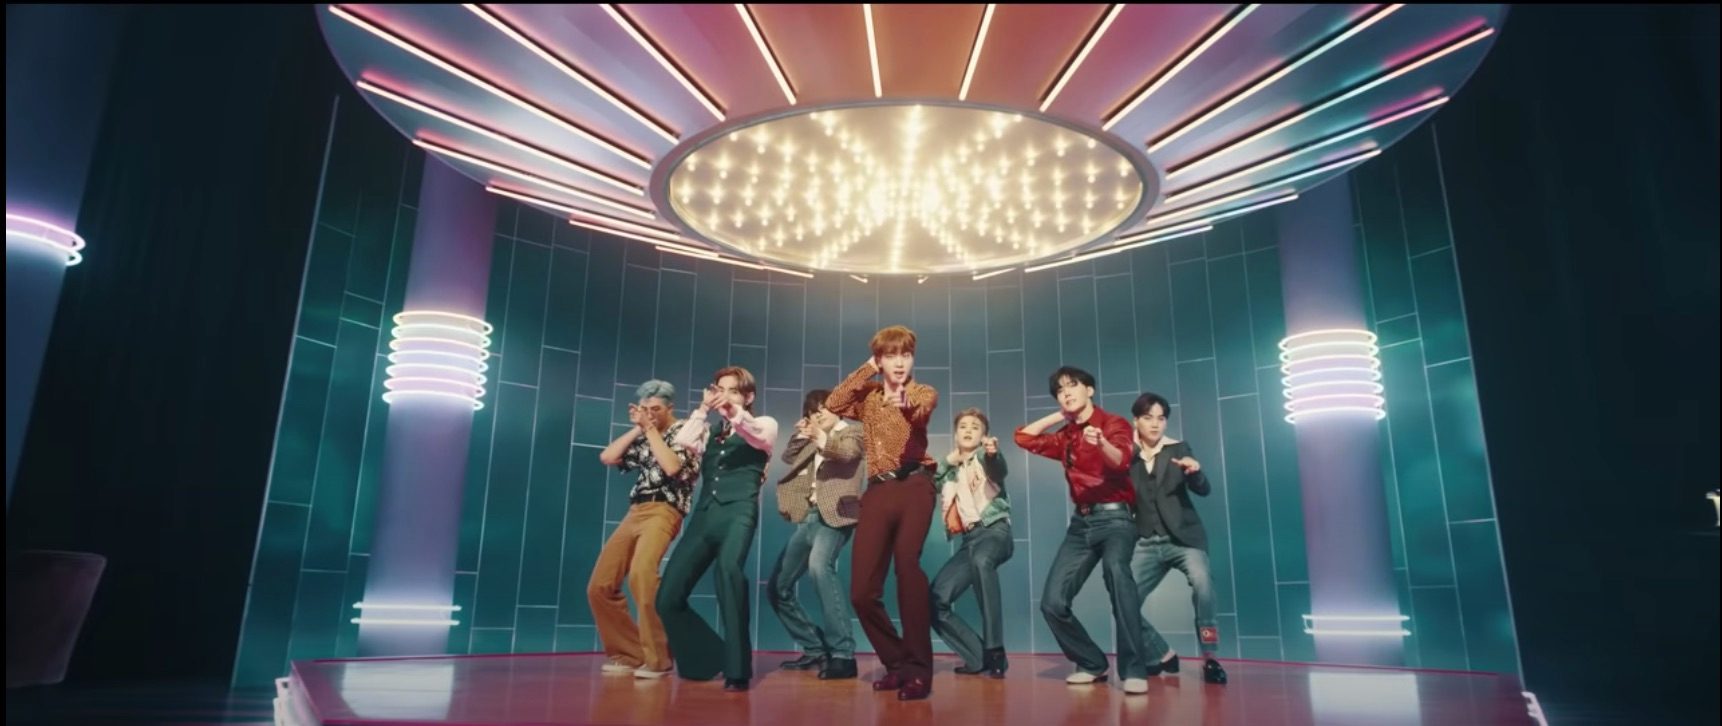 BTS breaks another YouTube record for ‘Dynamite’ MV